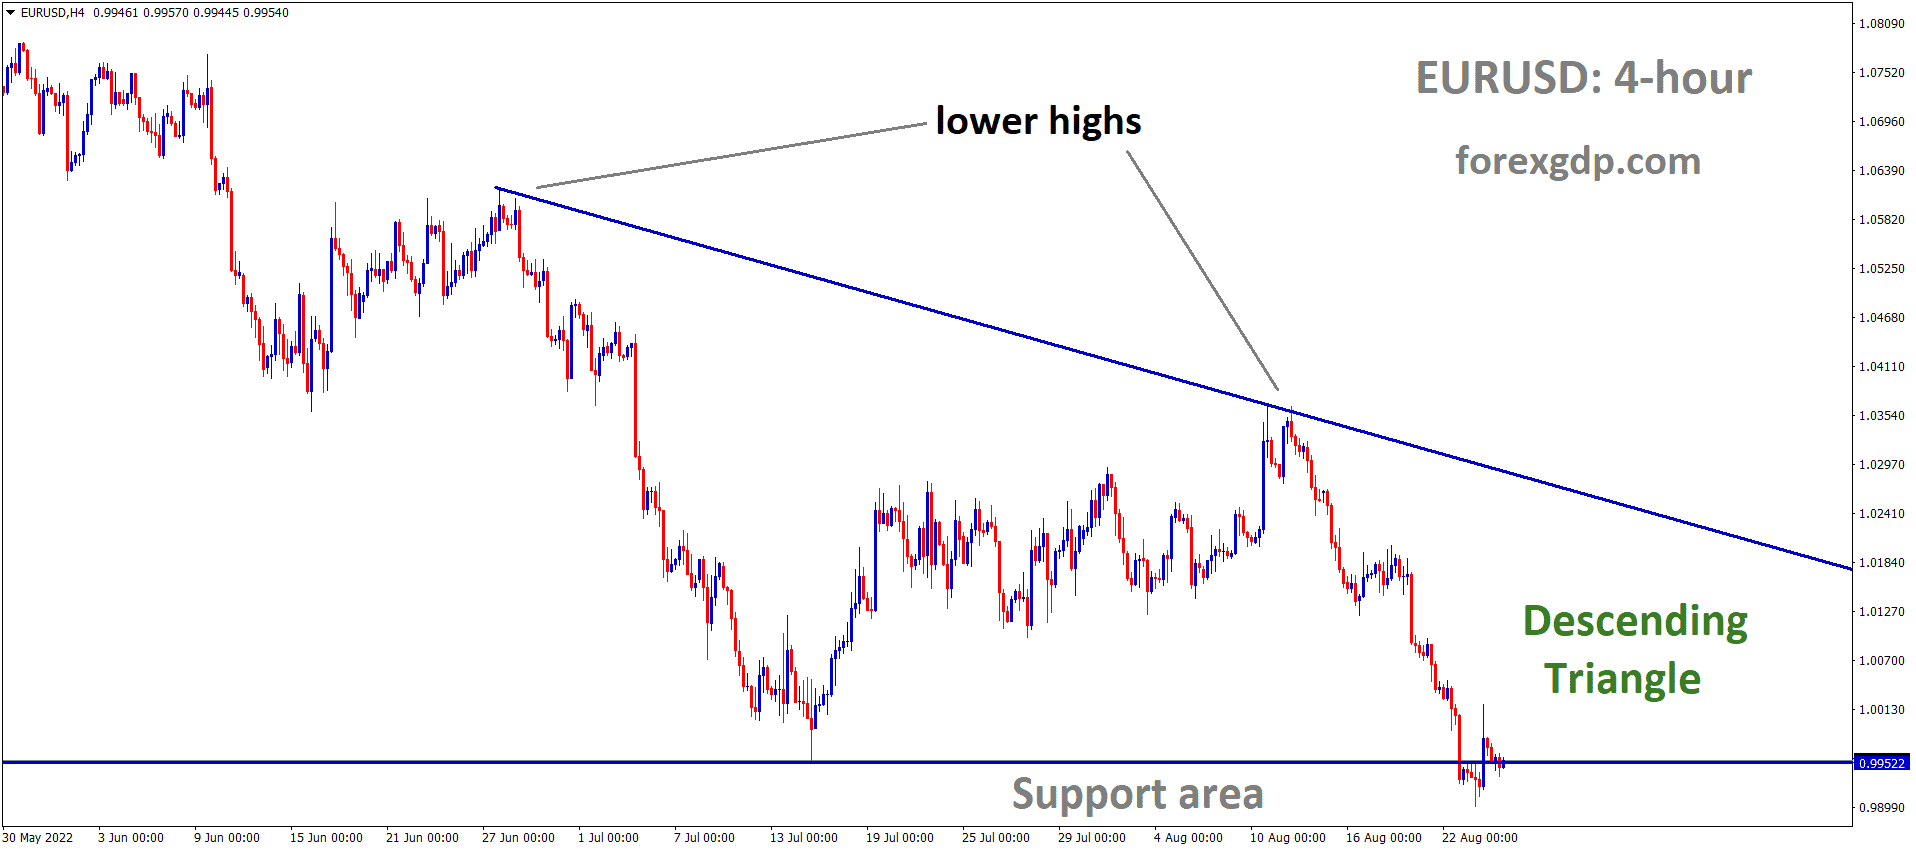 EURUSD is moving in the Descending triangle pattern and the Market has reached the horizontal support area of the pattern